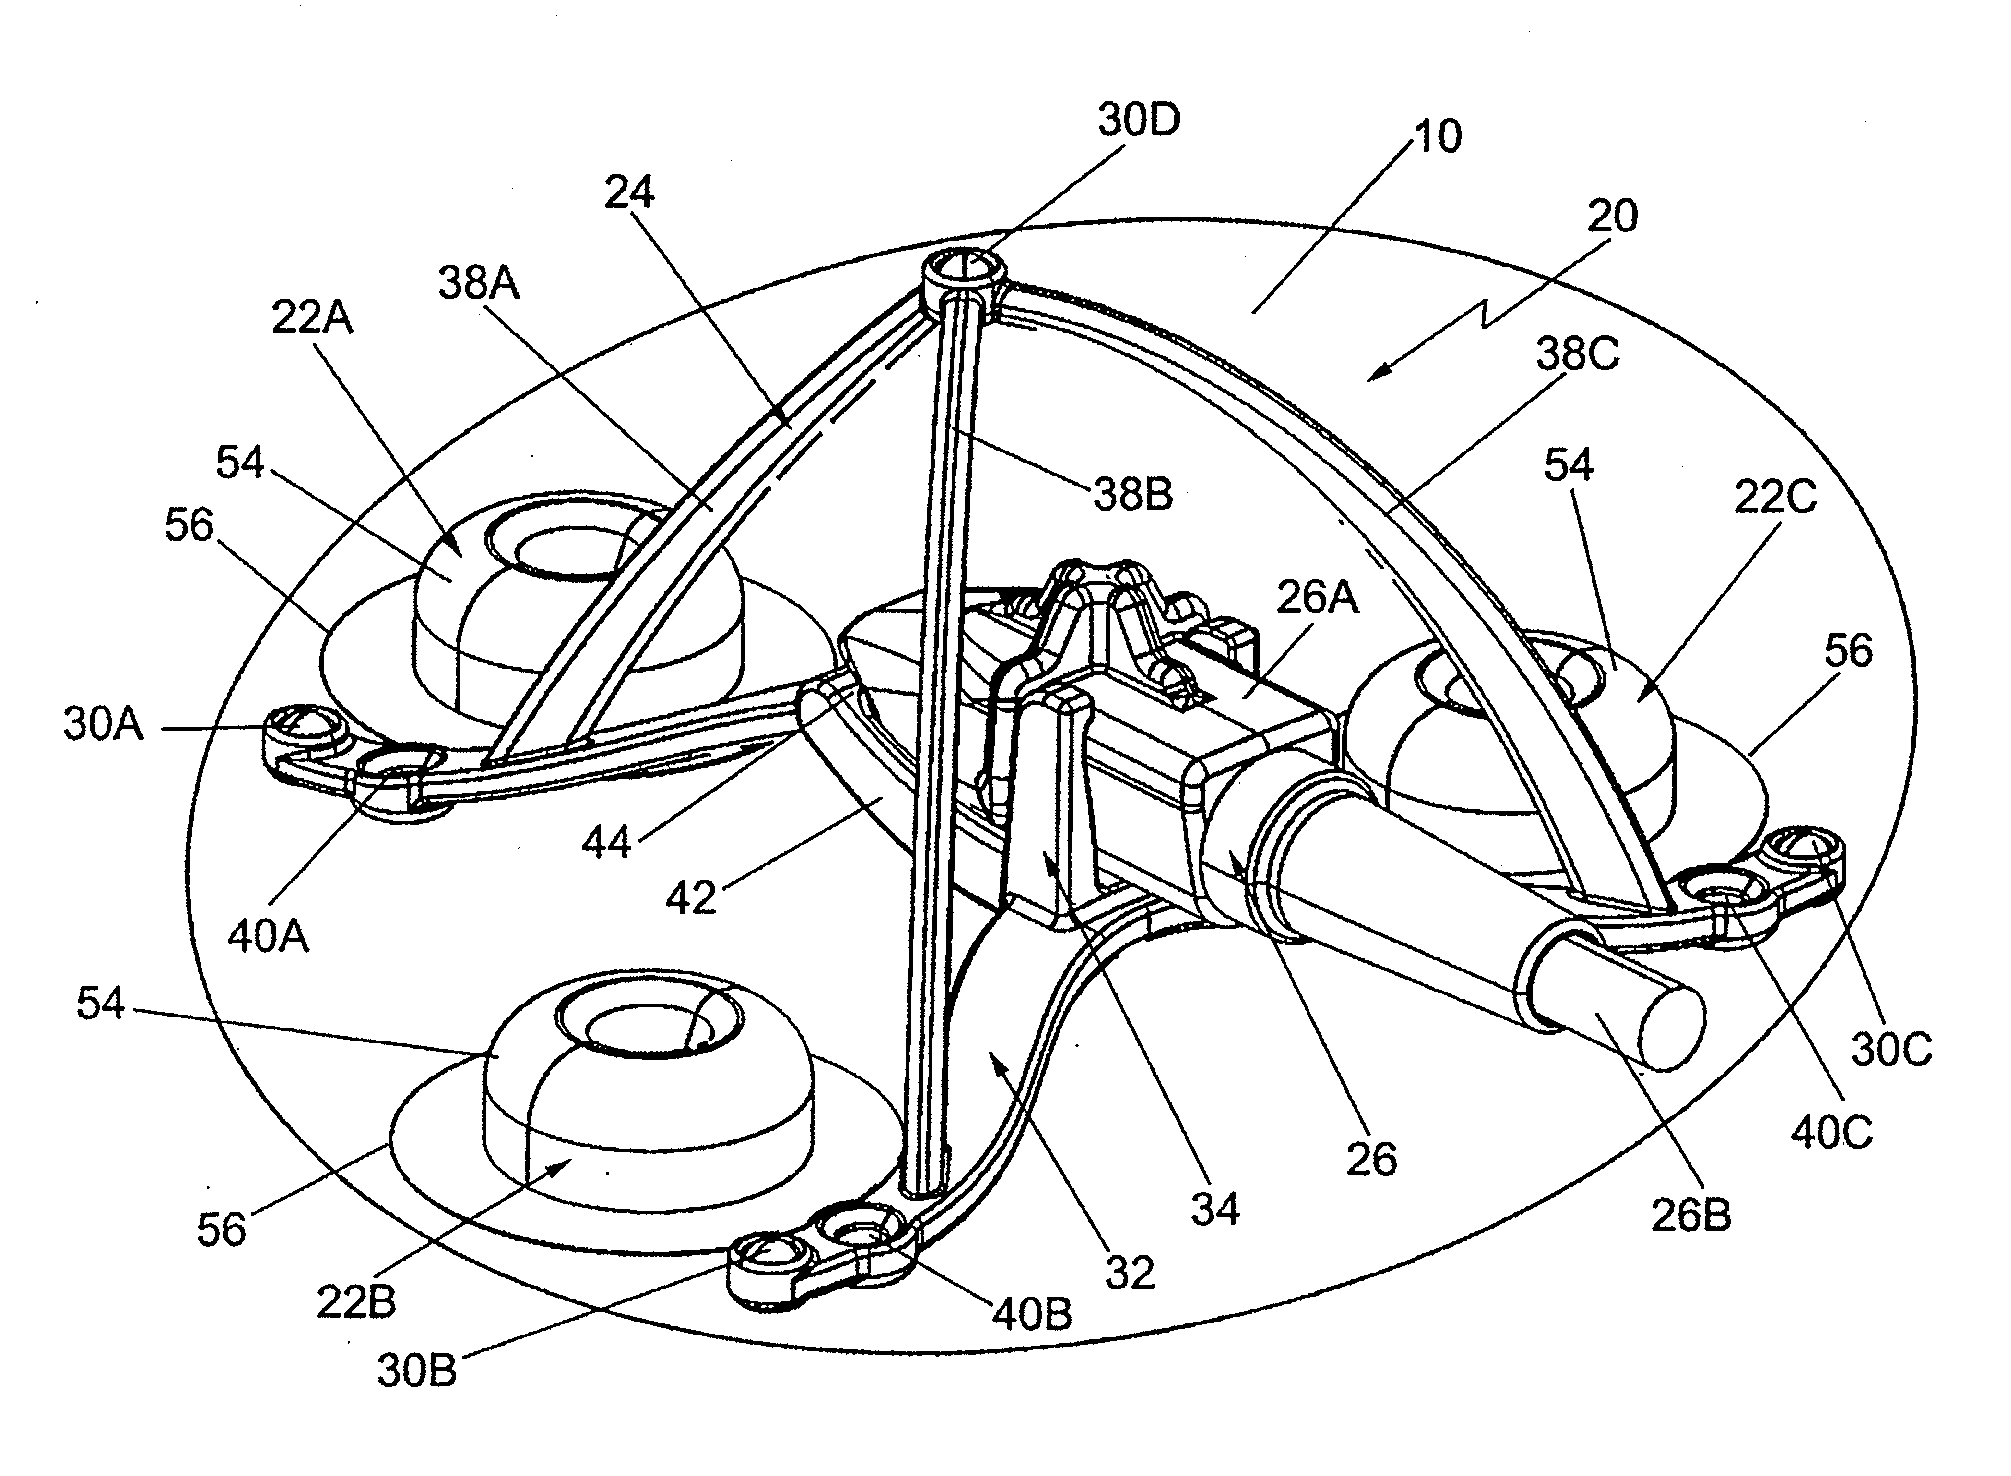 Active marker device for use in electromagnetic tracking system